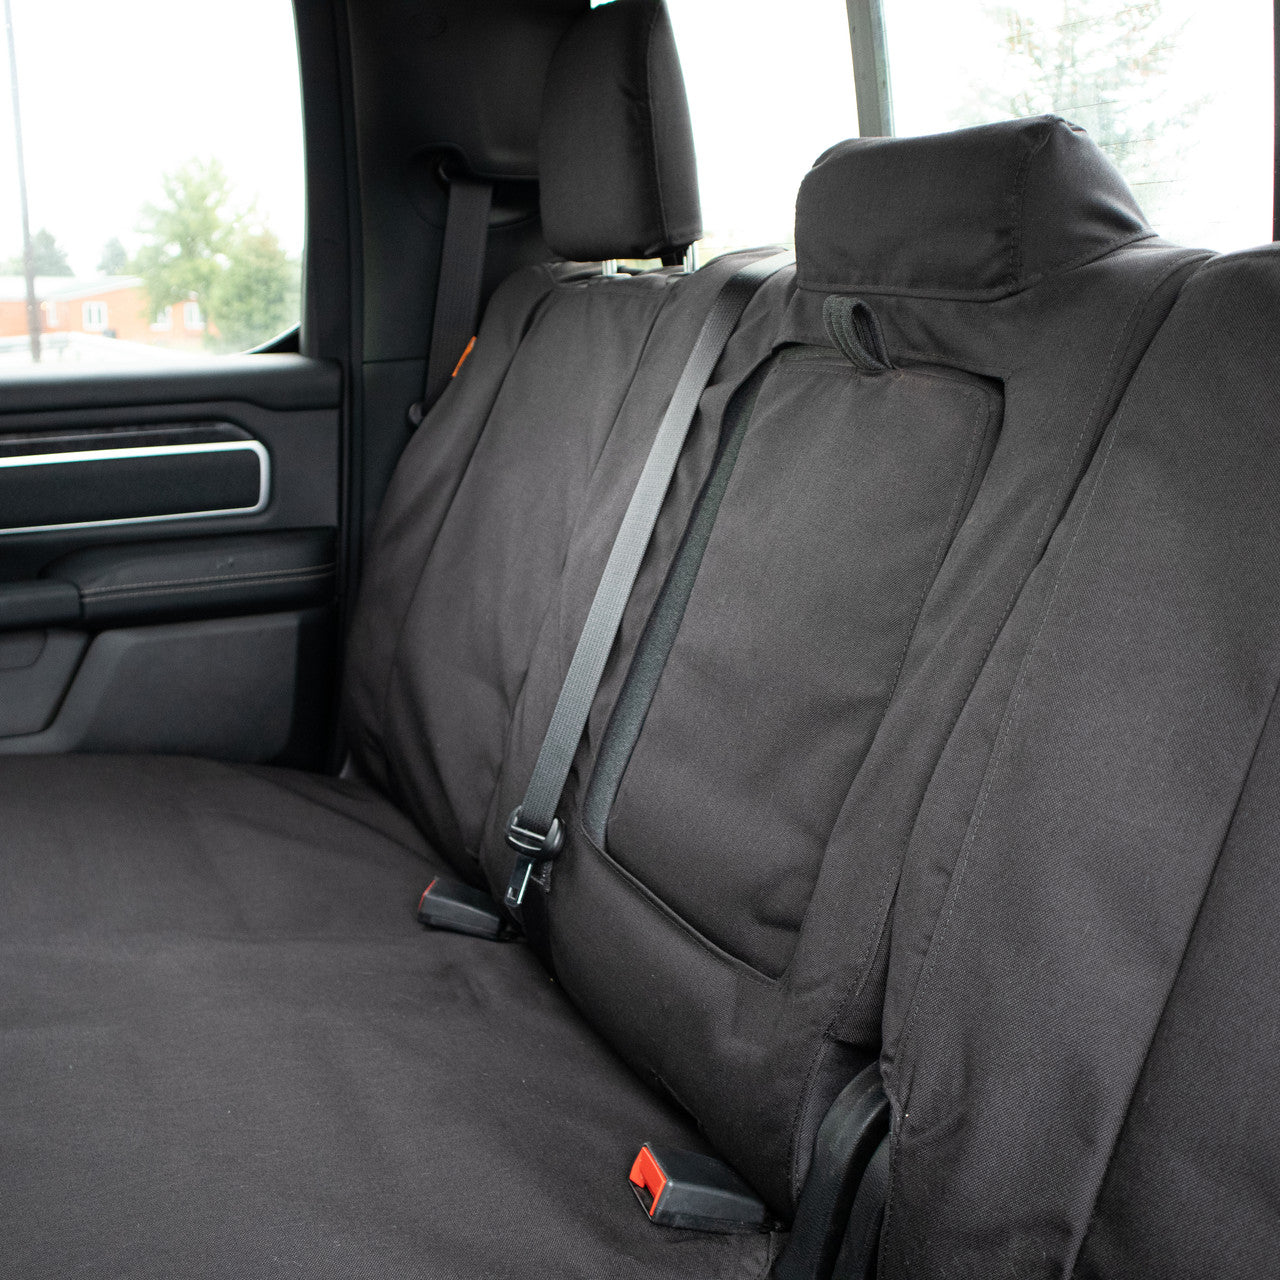 Rear Seat Covers for Ram Quad Cab (75514)